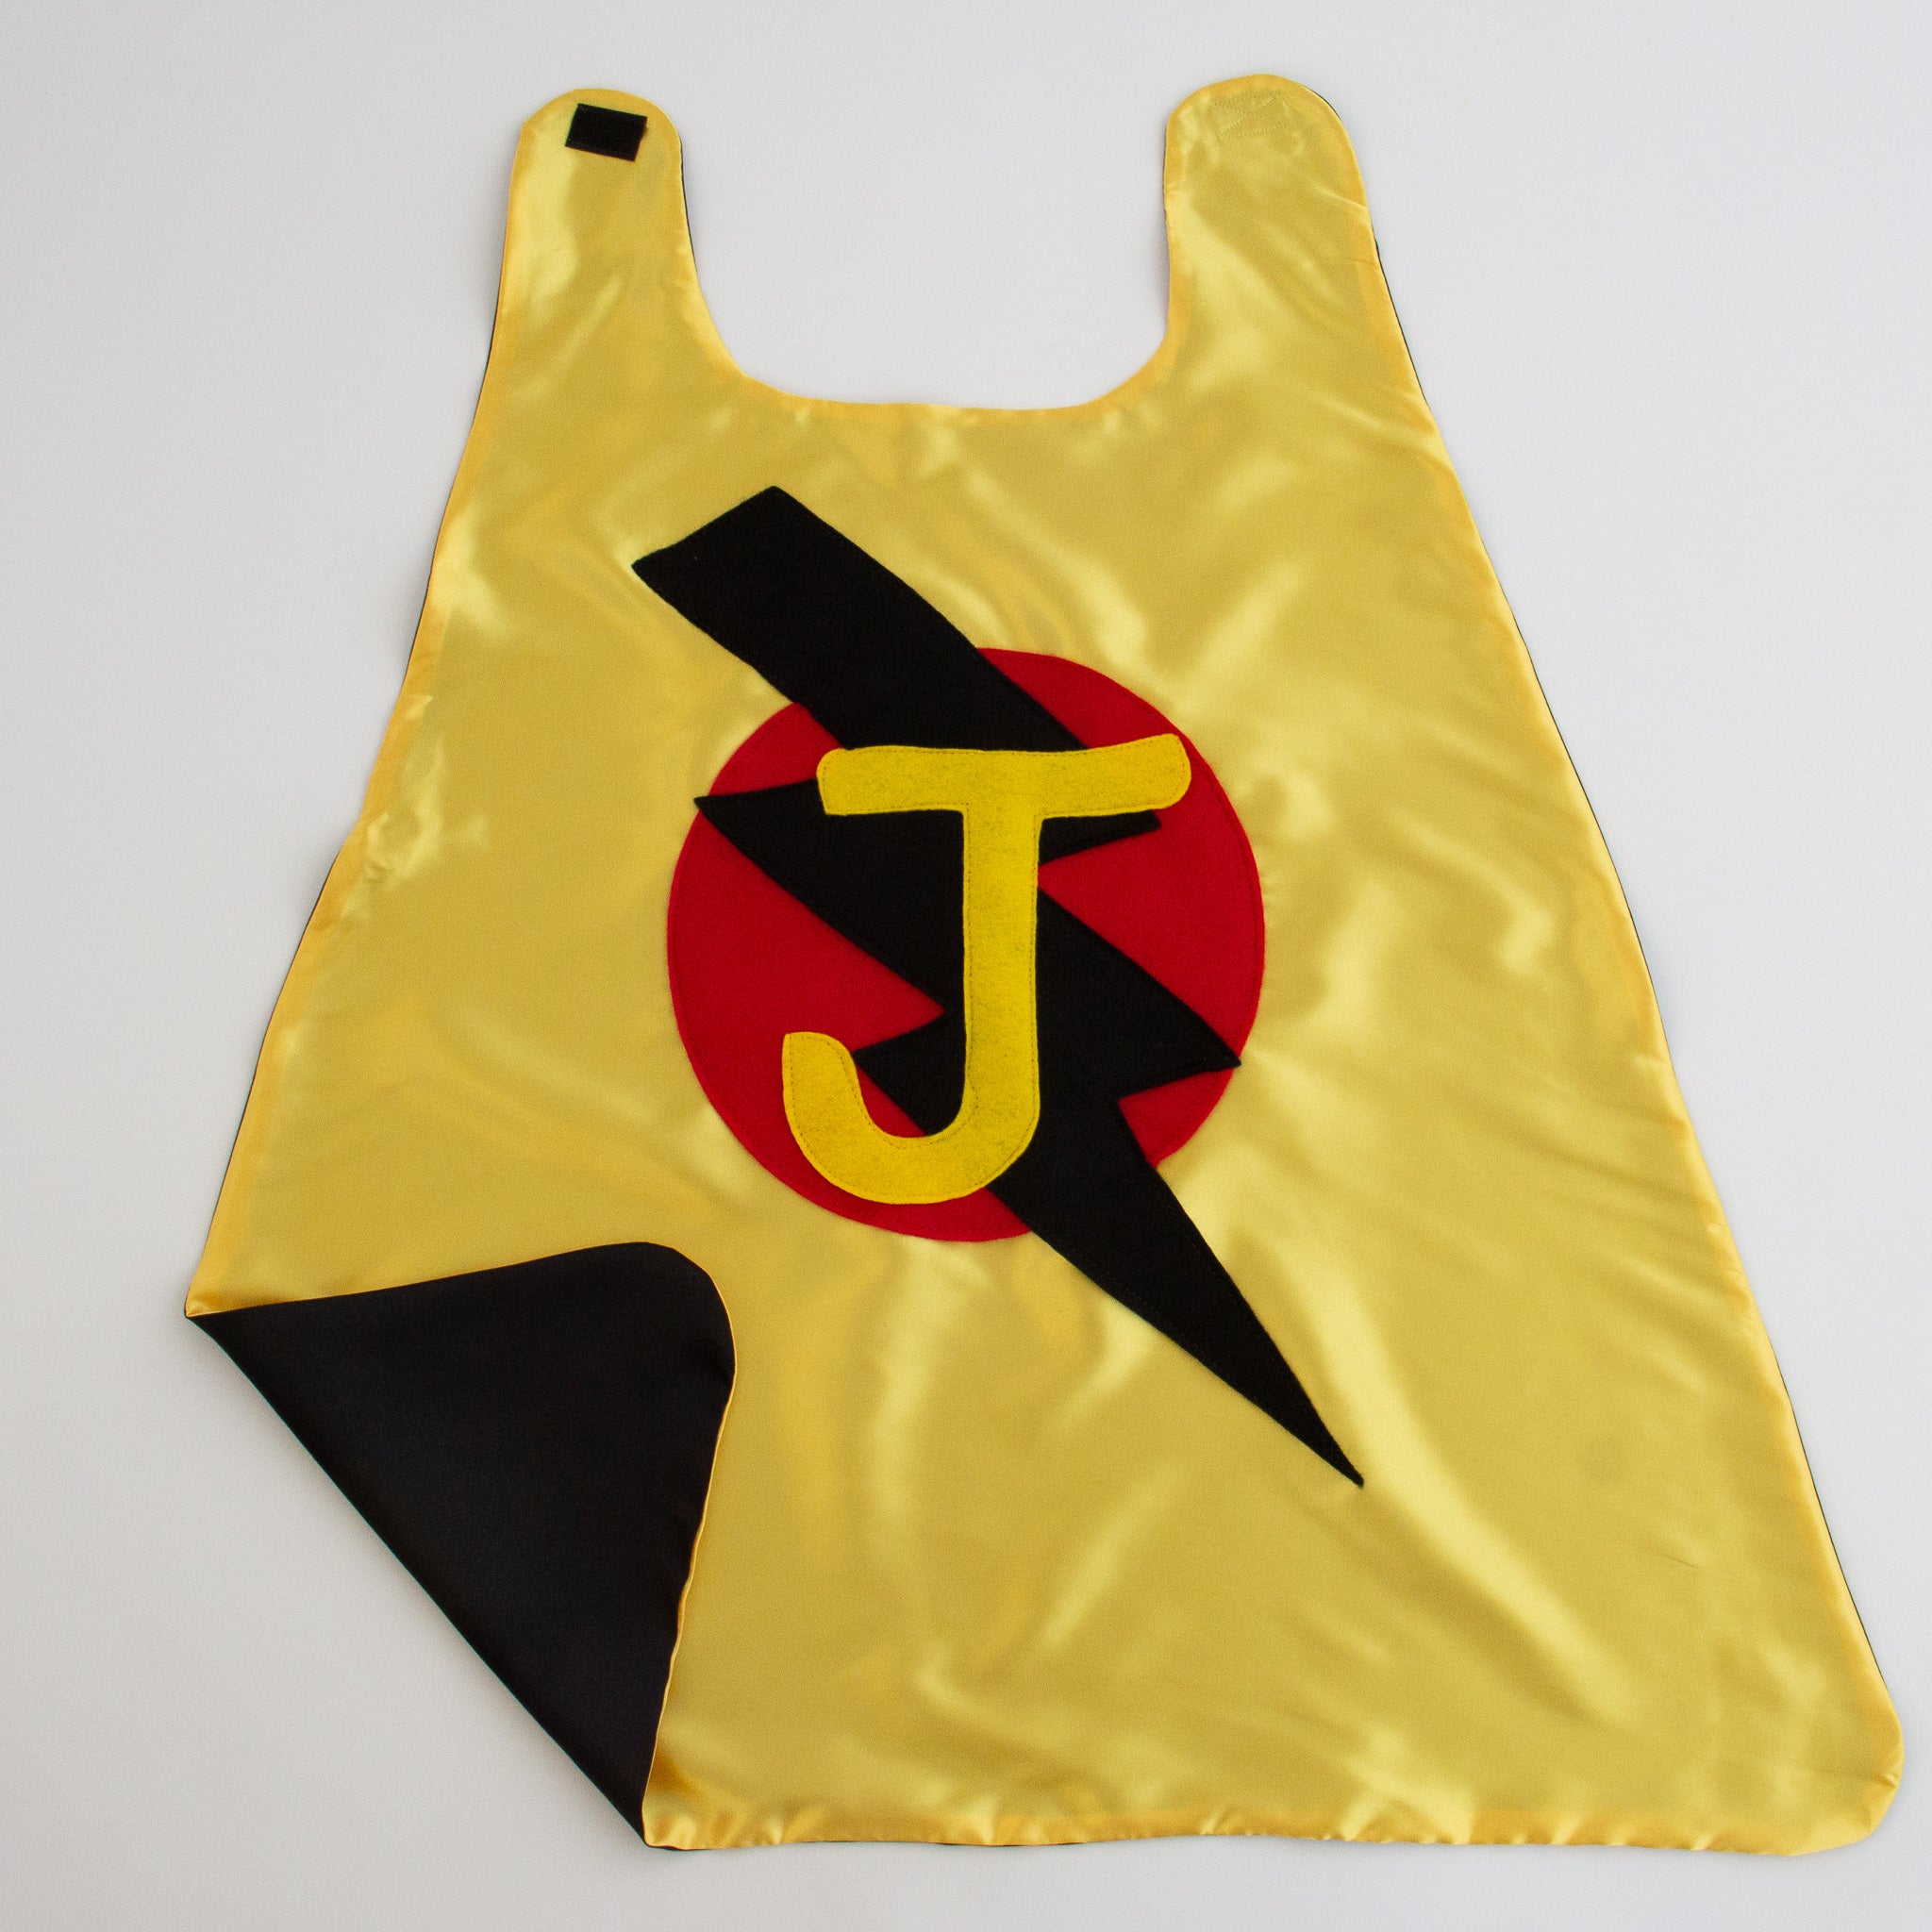 CUSTOM SUPERHERO CAPE - YELLOW/BLACK (RED CIRCLE/YELLOW LETTER) - CHOOSE YOUR INTIAL